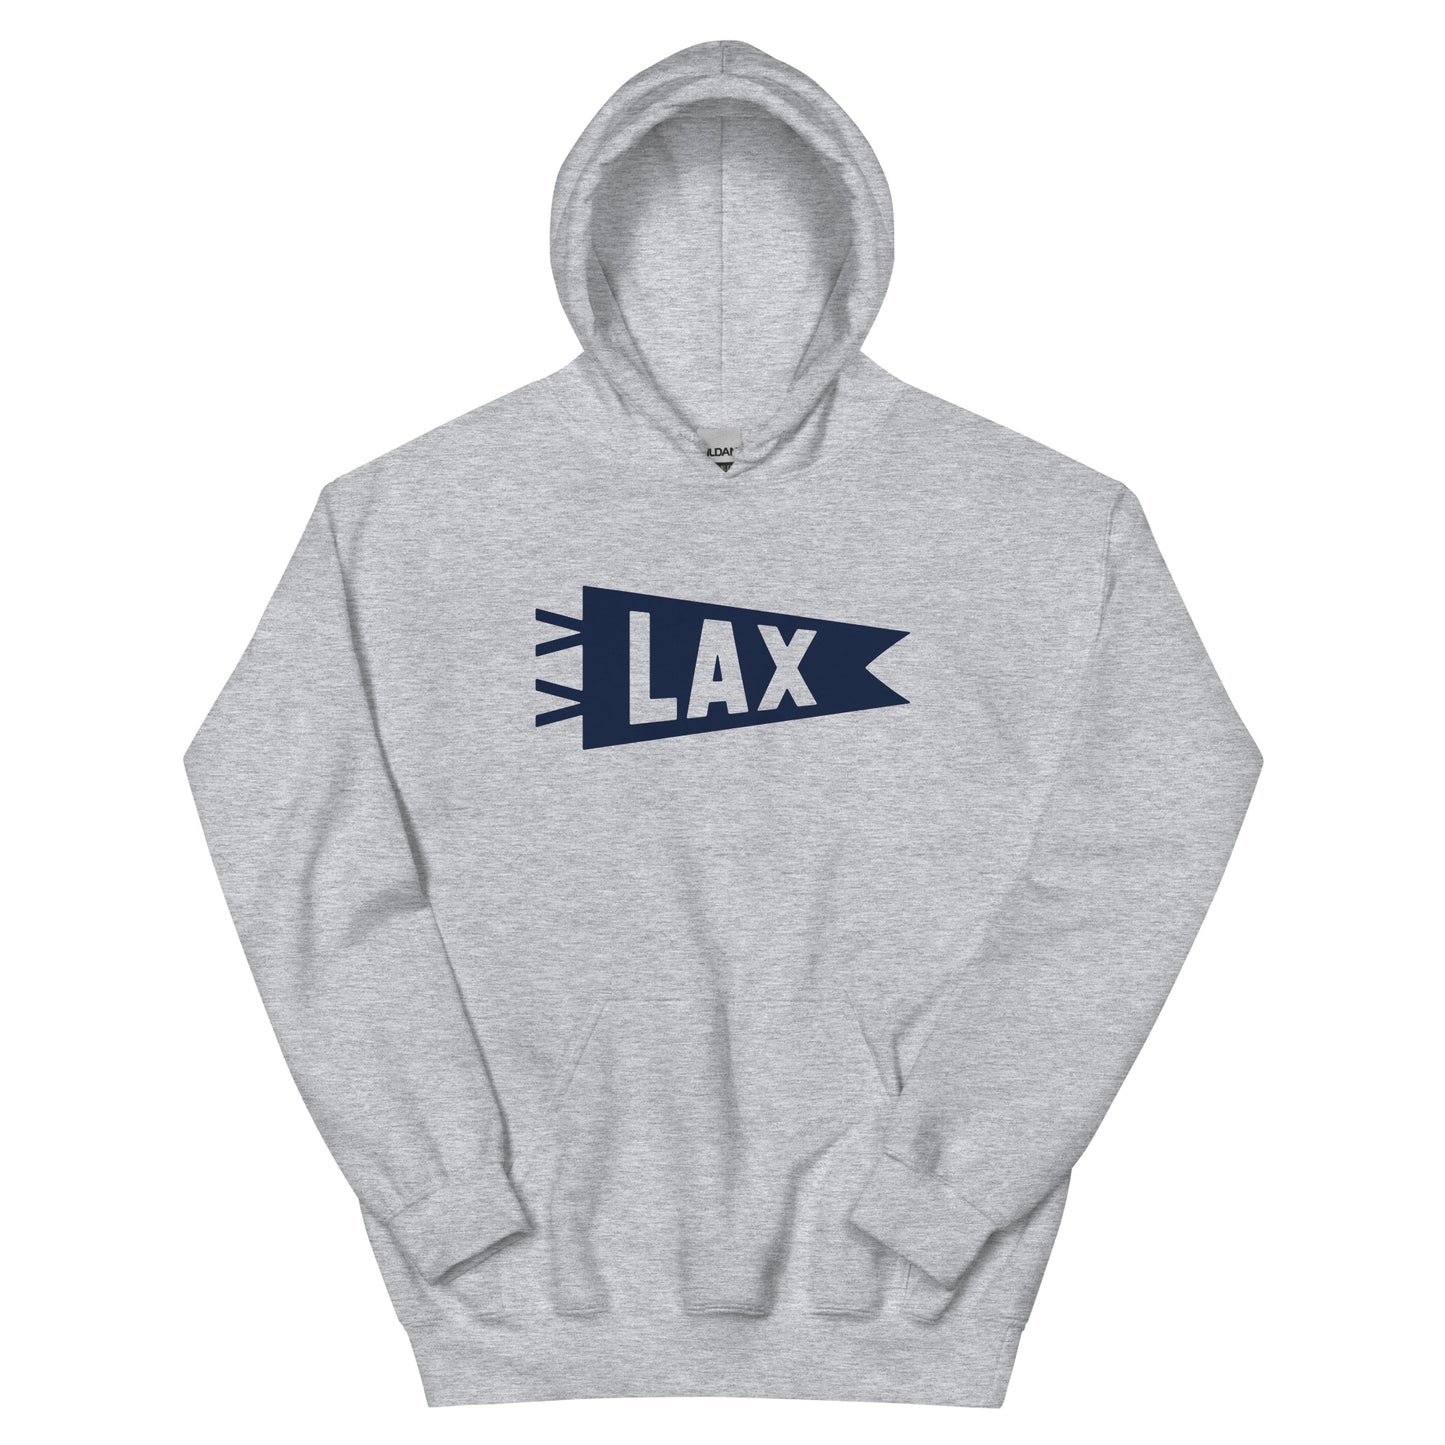 Airport Code Unisex Hoodie - Navy Blue Graphic • LAX Los Angeles • YHM Designs - Image 02